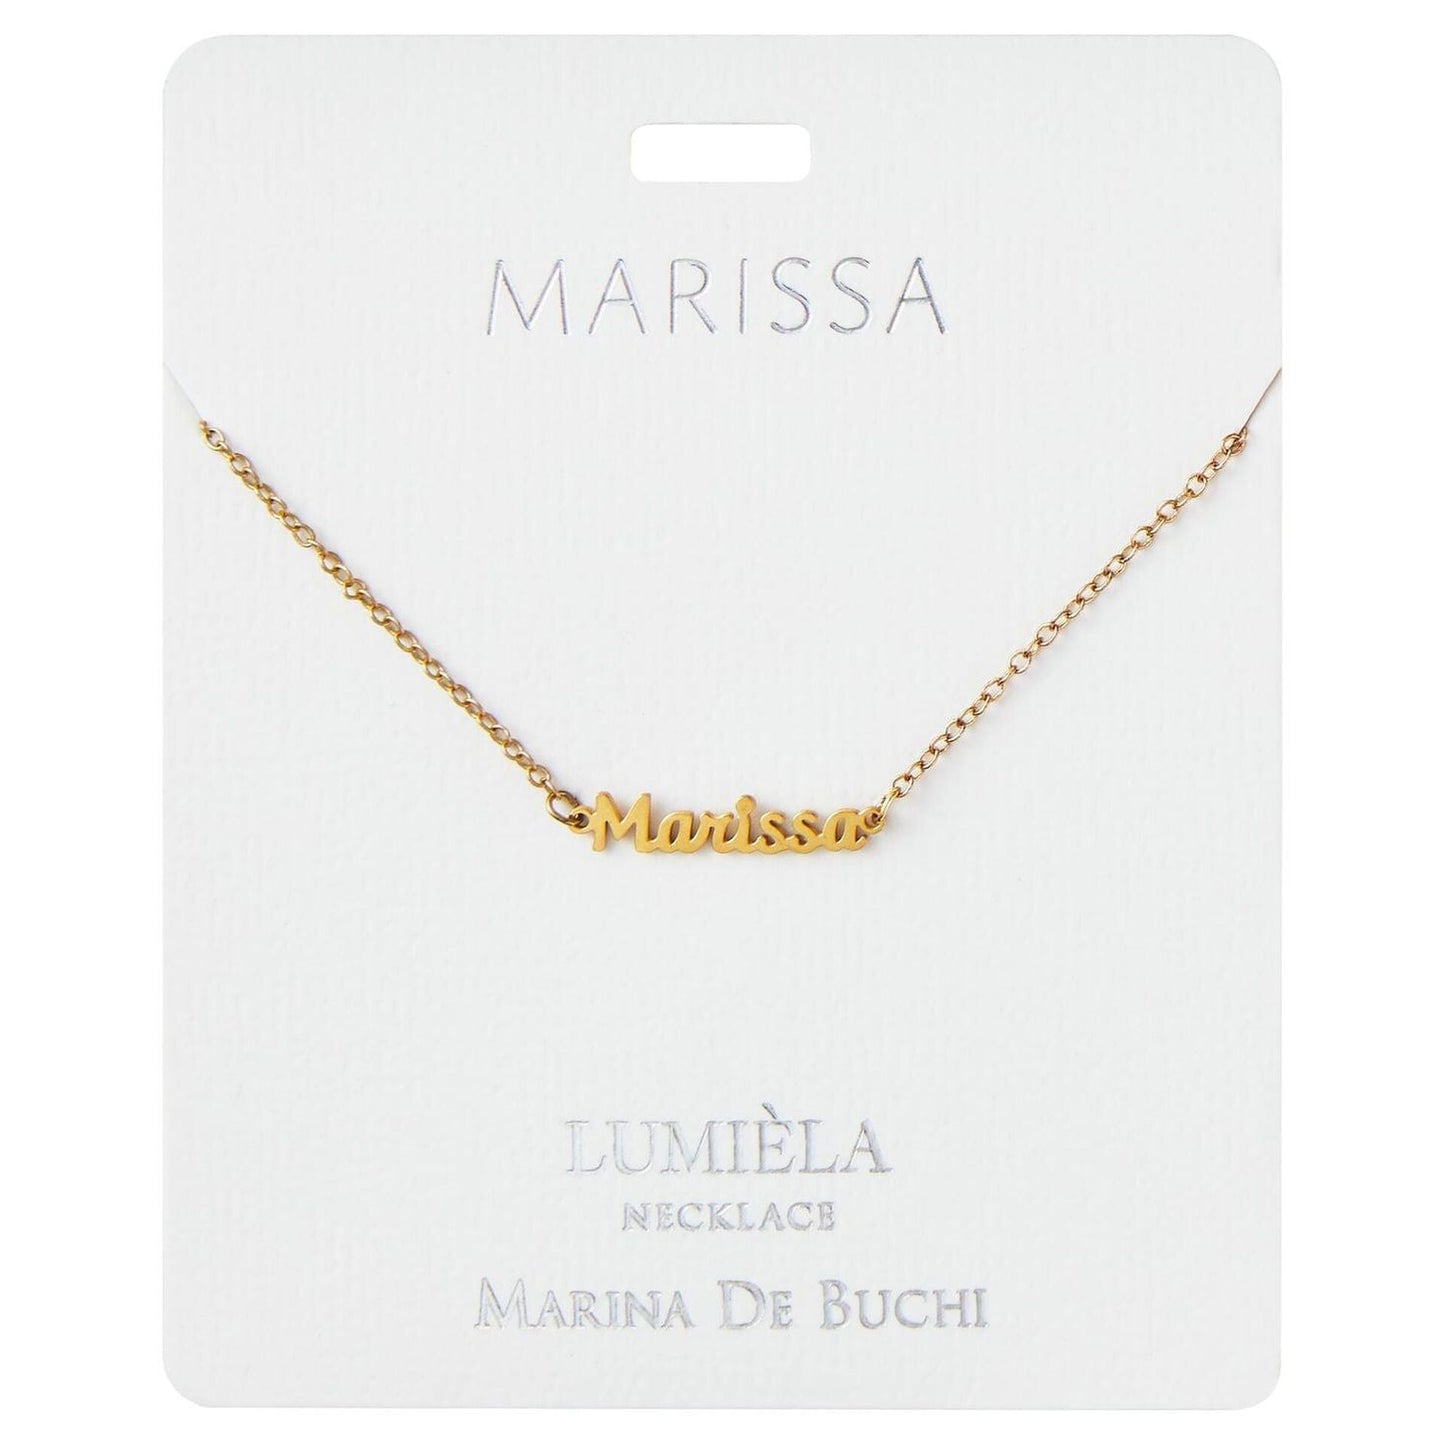 Lumiela Personalized Nameplate Kelsey Necklace in Gold Tone